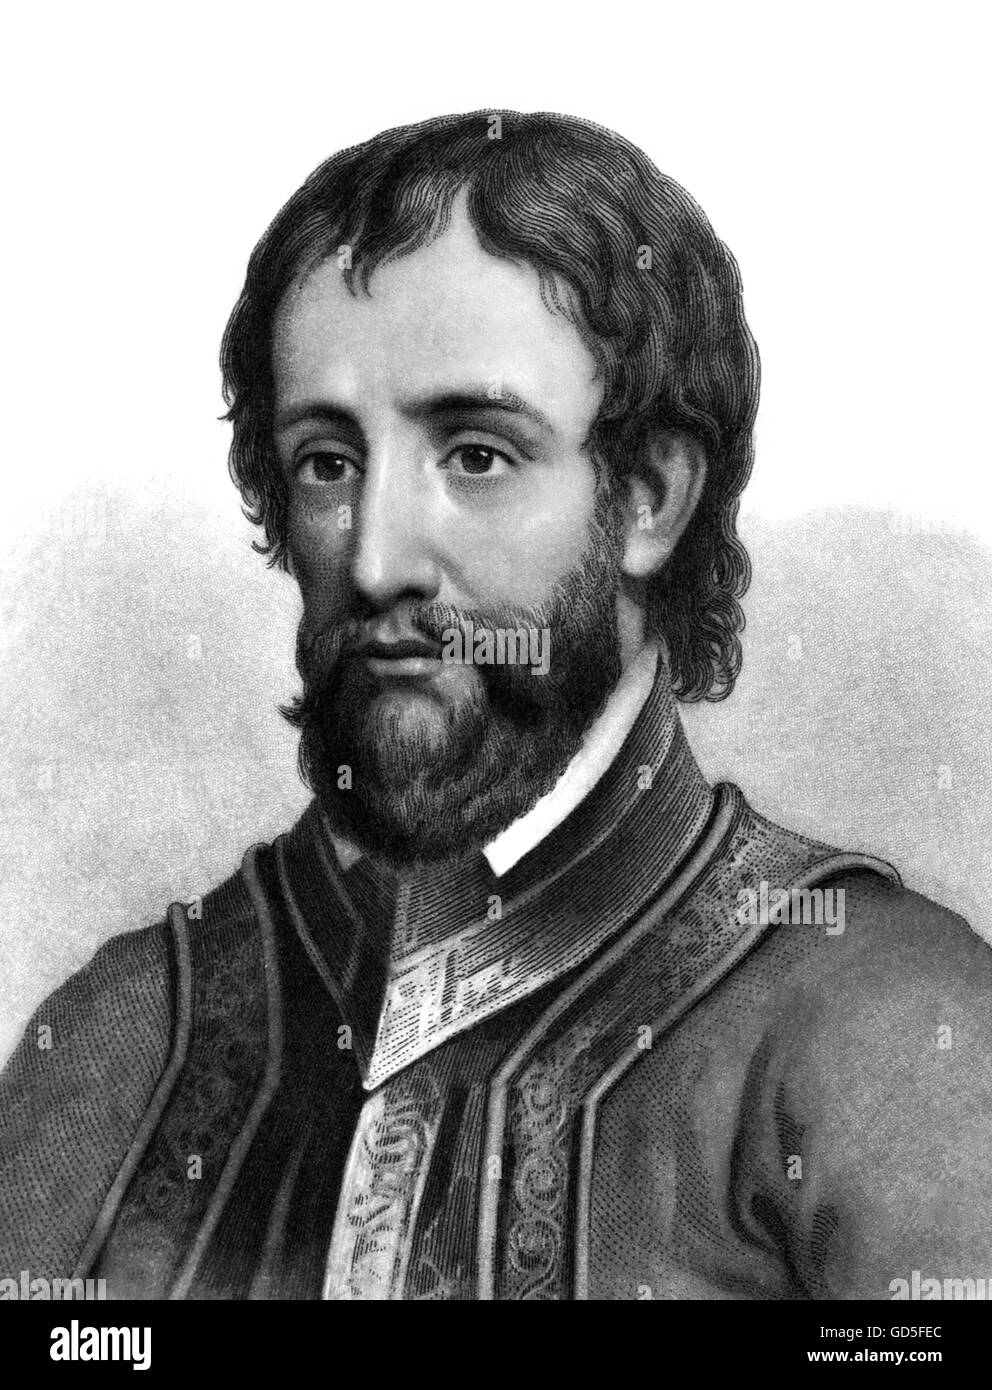 Hernando de Soto (c. 1500-1542), a Spanish explorer and conquistador who led the first European expedition into what is now the United States. Engraving from 'The life, Travels and Adventures of Ferdinand De Soto' by Lambert A. Wilmer (1858). Stock Photo